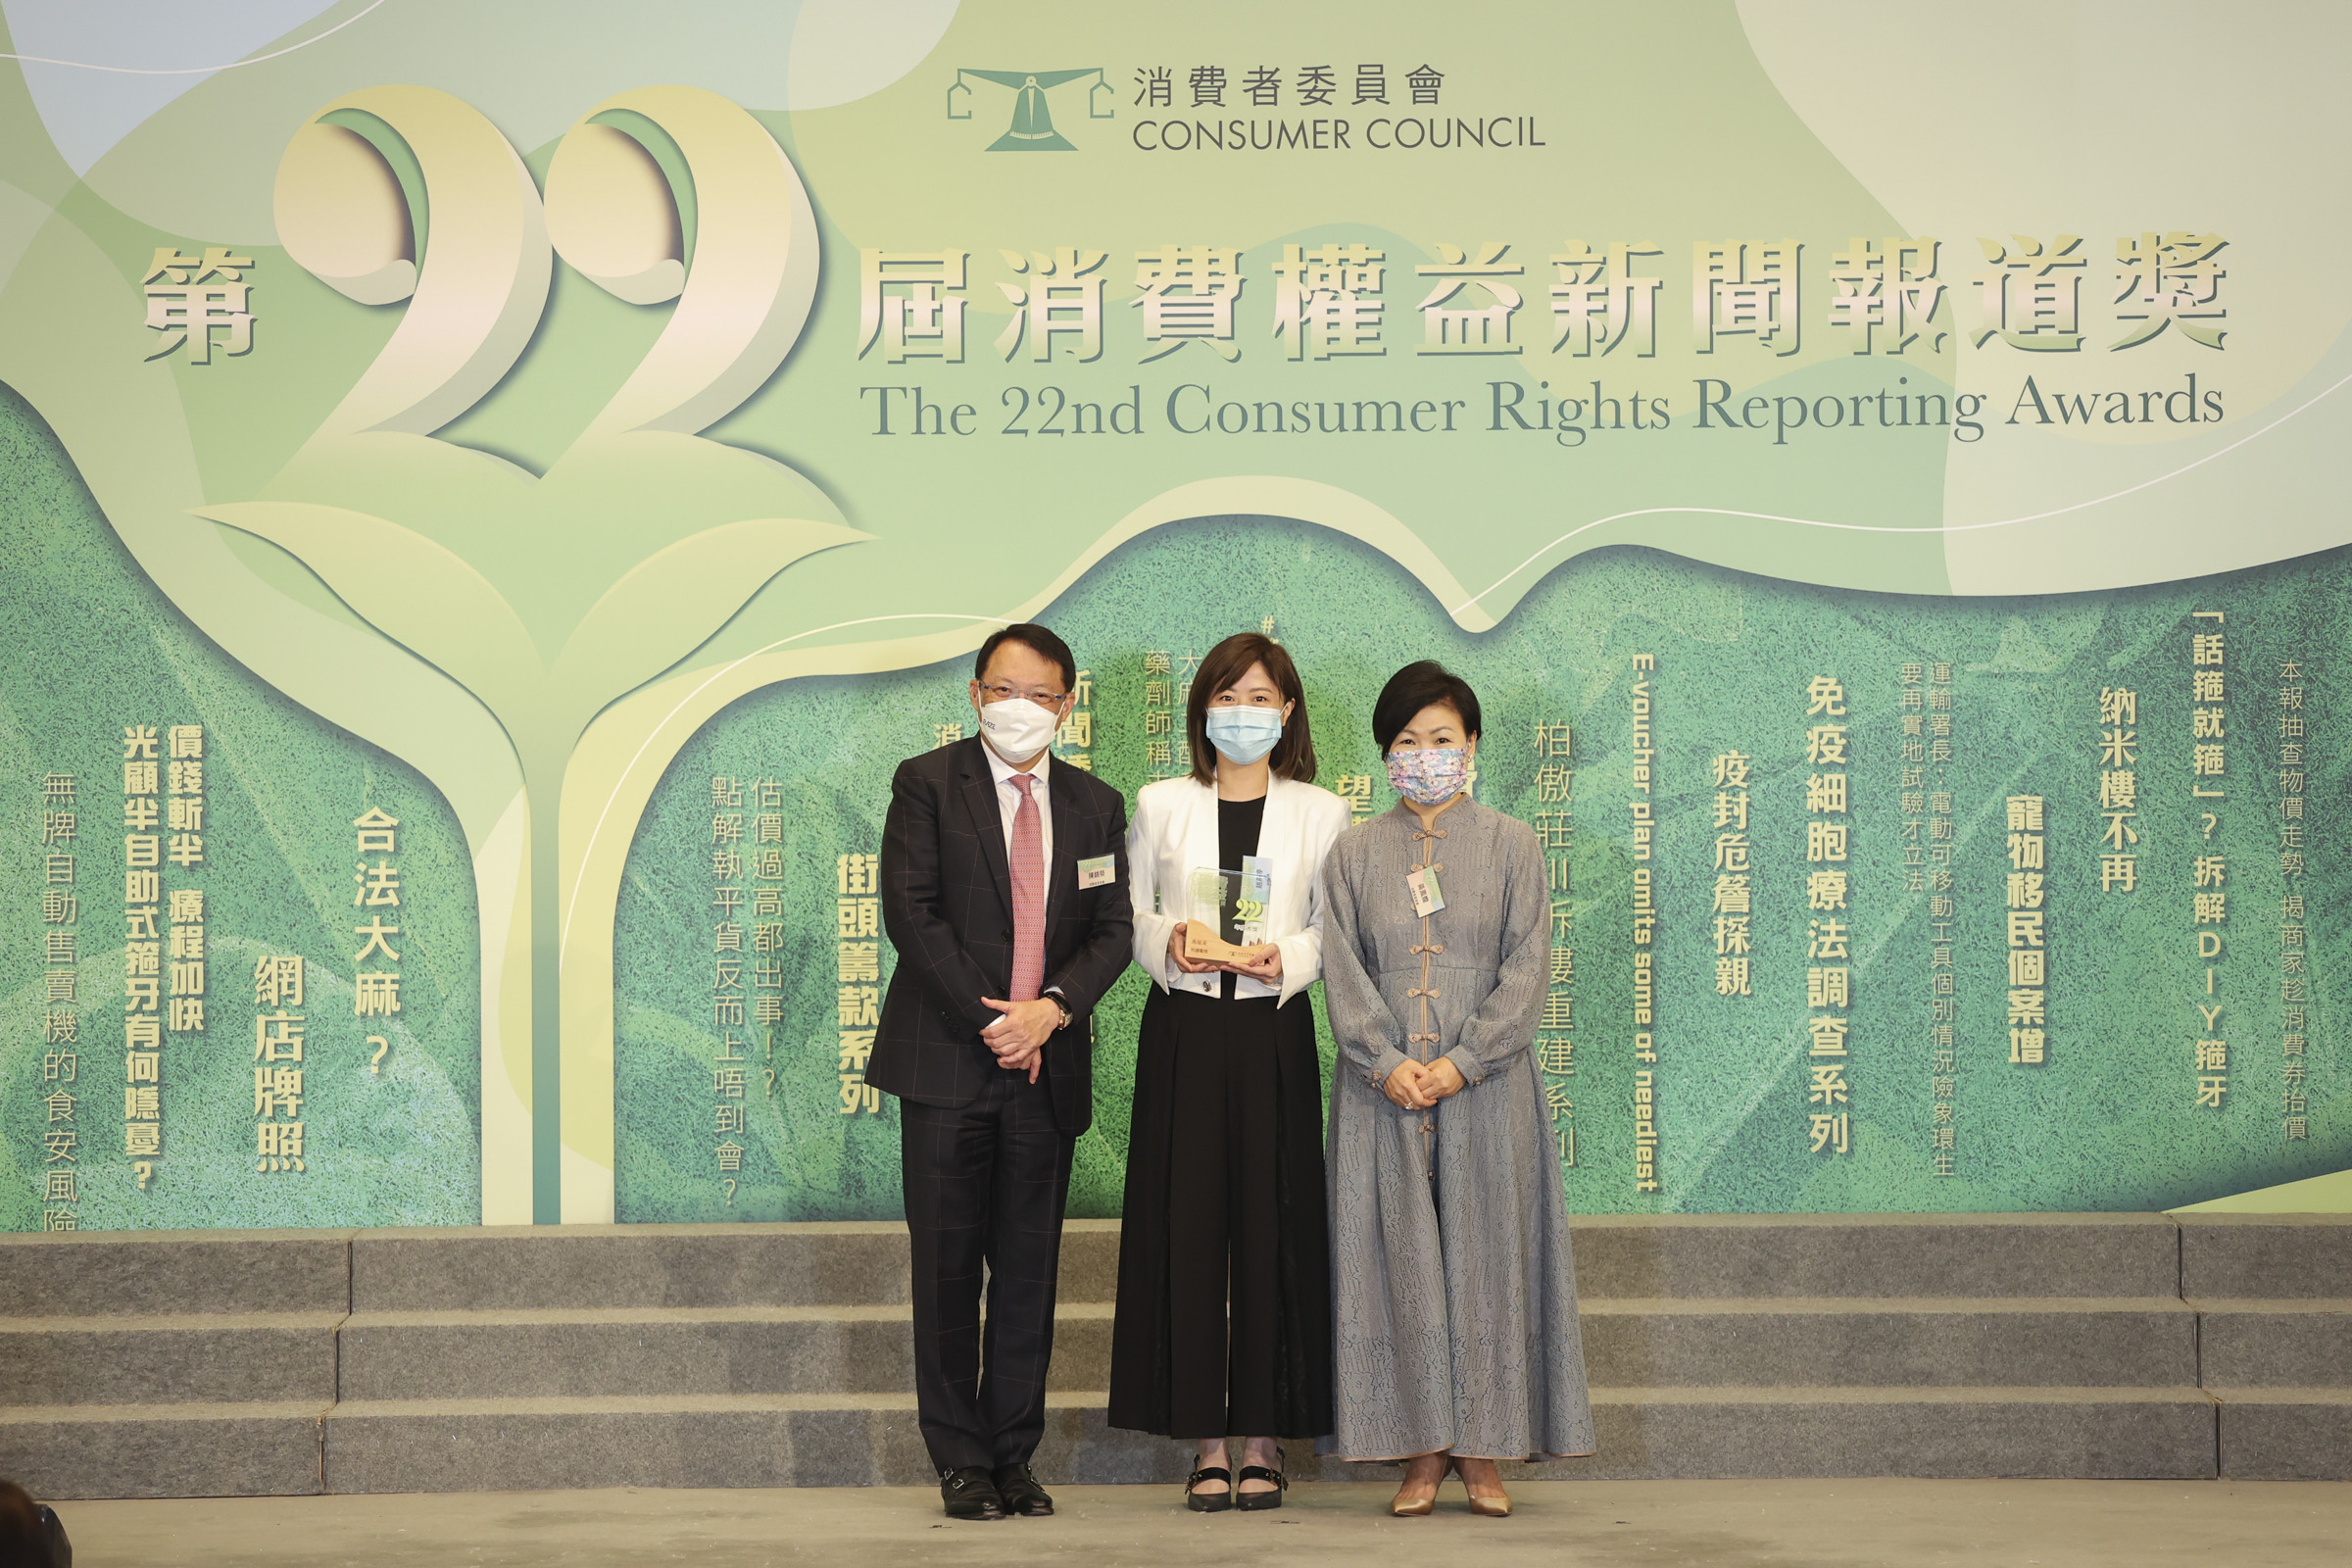 7.	The TVB reporting crew which produced “News Magazine: Beauty from Injection?” (新聞透視：越打越靚？), the winning entry of both the Grand Award and Gold Award in Video Reporting (Long Clip) Category, receives the trophy from Mr Clement Chan Kam-wing, Chairman of the Consumer Council and Ms Gilly Wong Fung-han, Chief Executive of the Consumer Council.